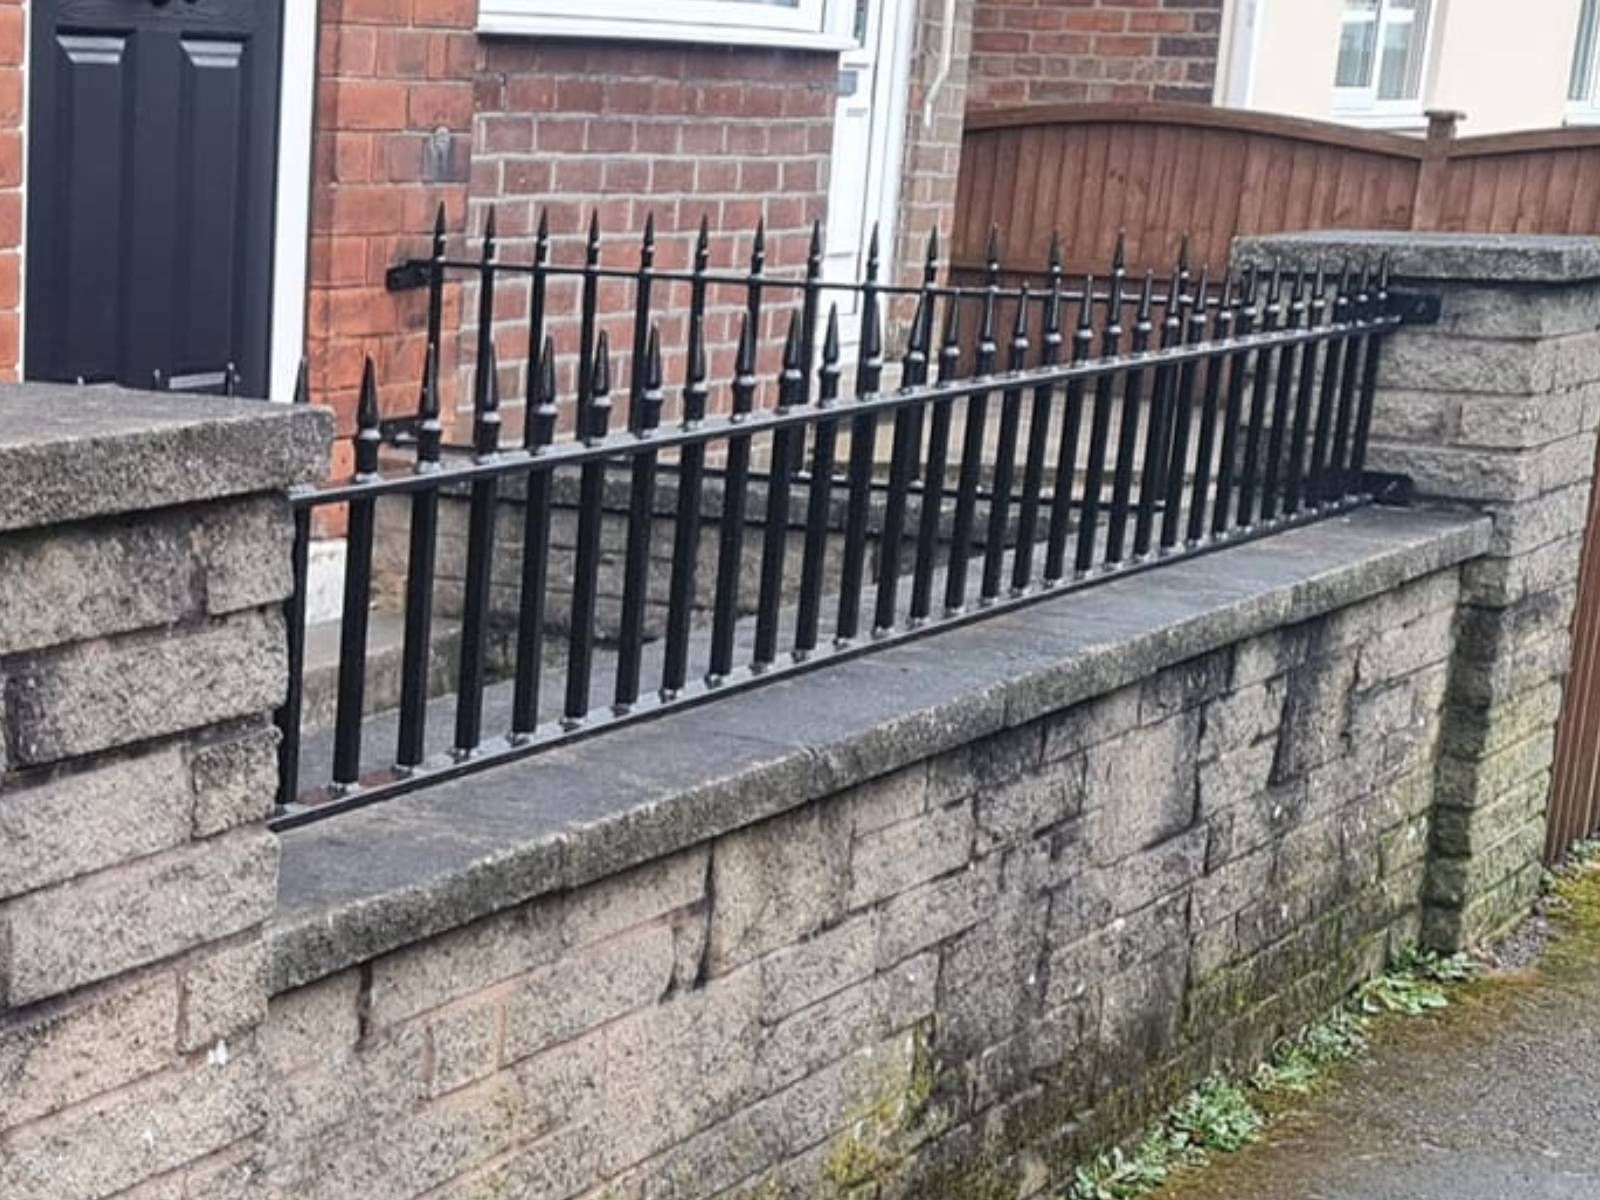 Nottingham Metalworks metal garden wall railings with spiked tops in Nottingham